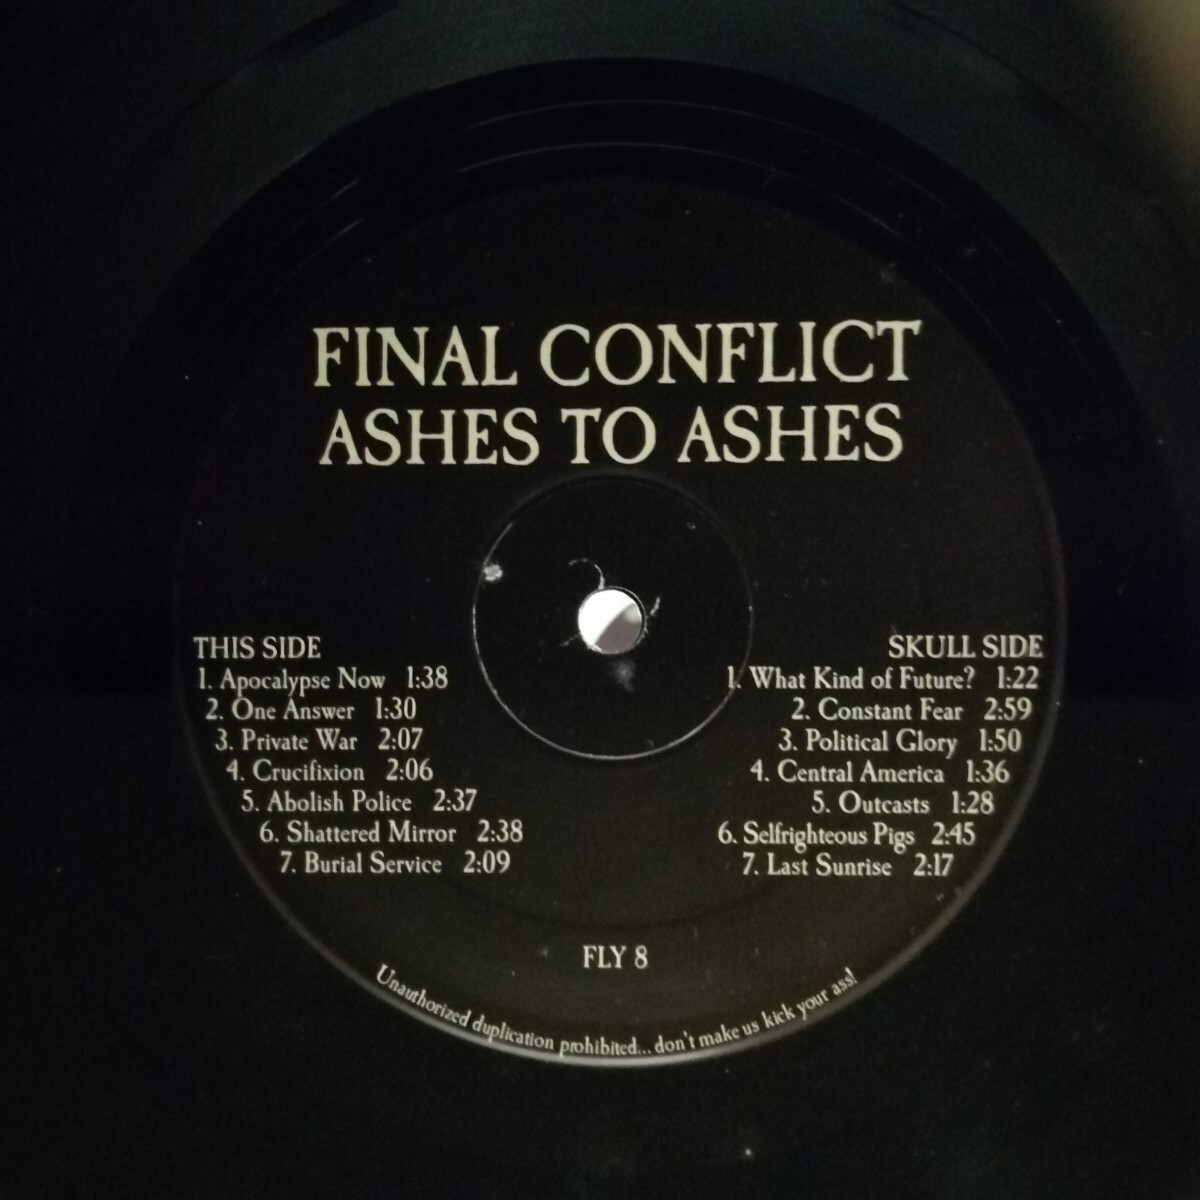 D04 中古LP 中古レコード　FINAL CONFLICT ashes to ashes FLY 8　US盤　ハードコア　パンク　_画像6